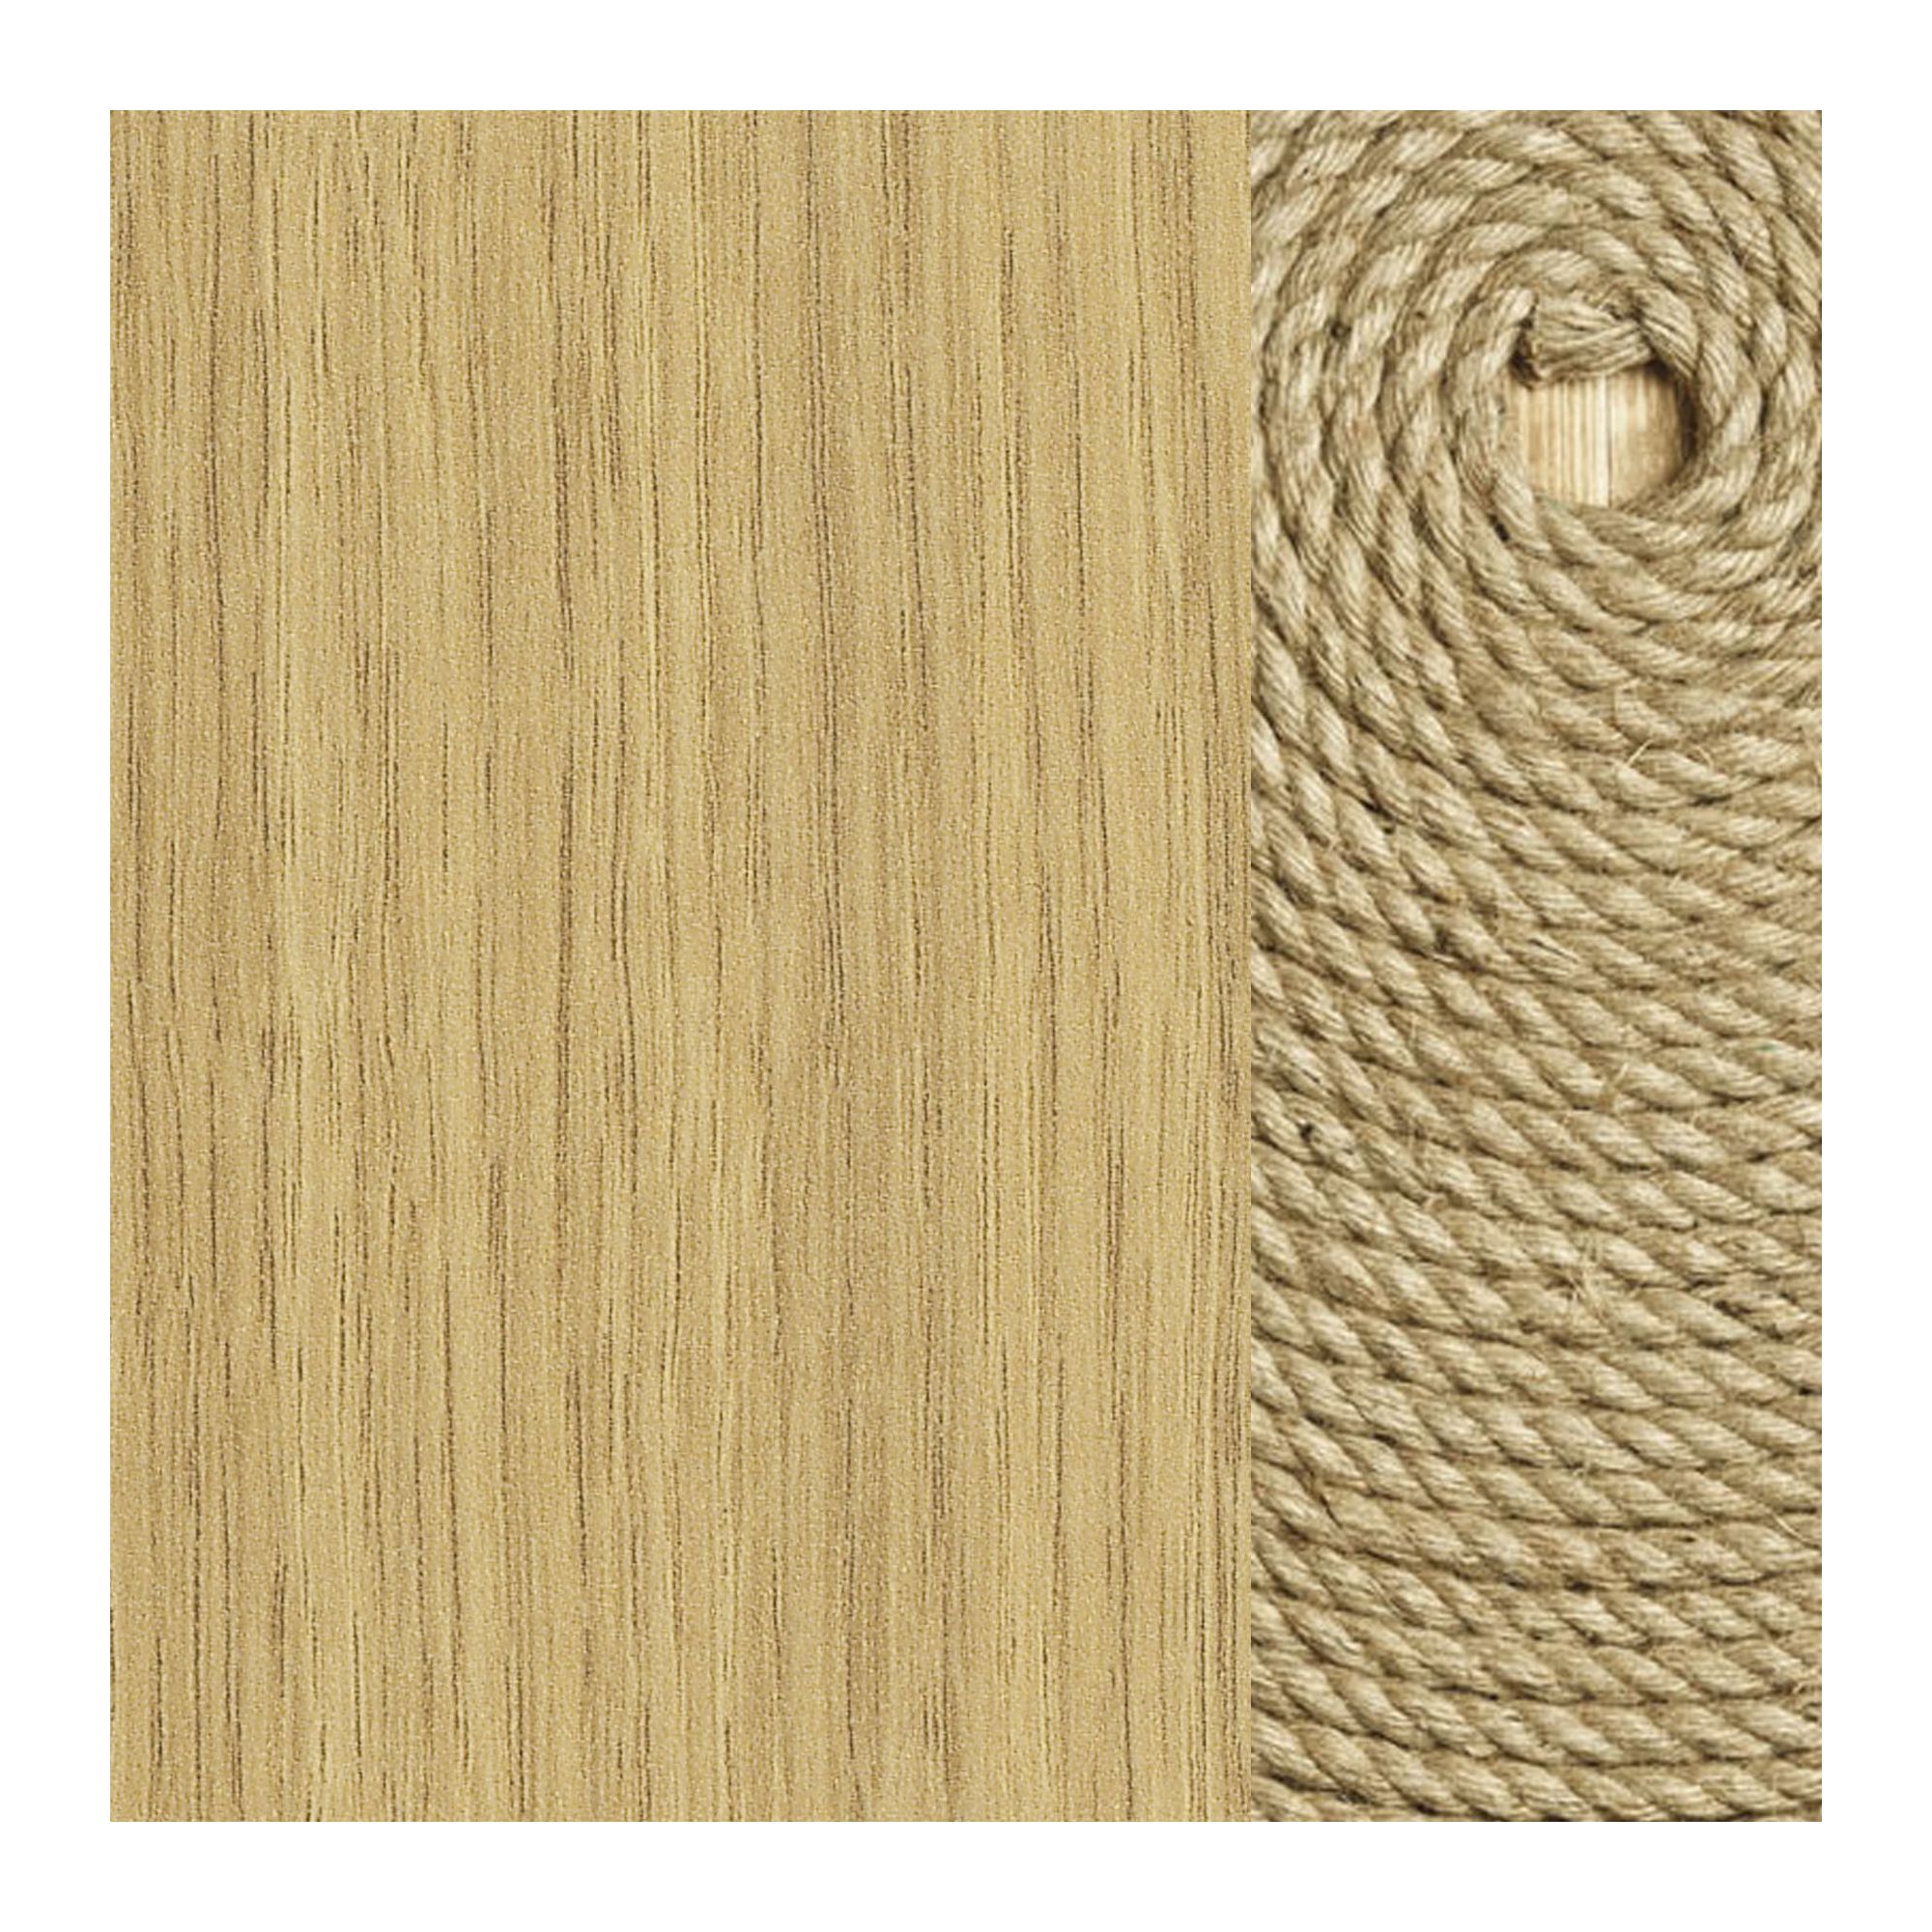 Didit Two-Drawer Wardrobe - Essential Oak Natural at Tesco Direct